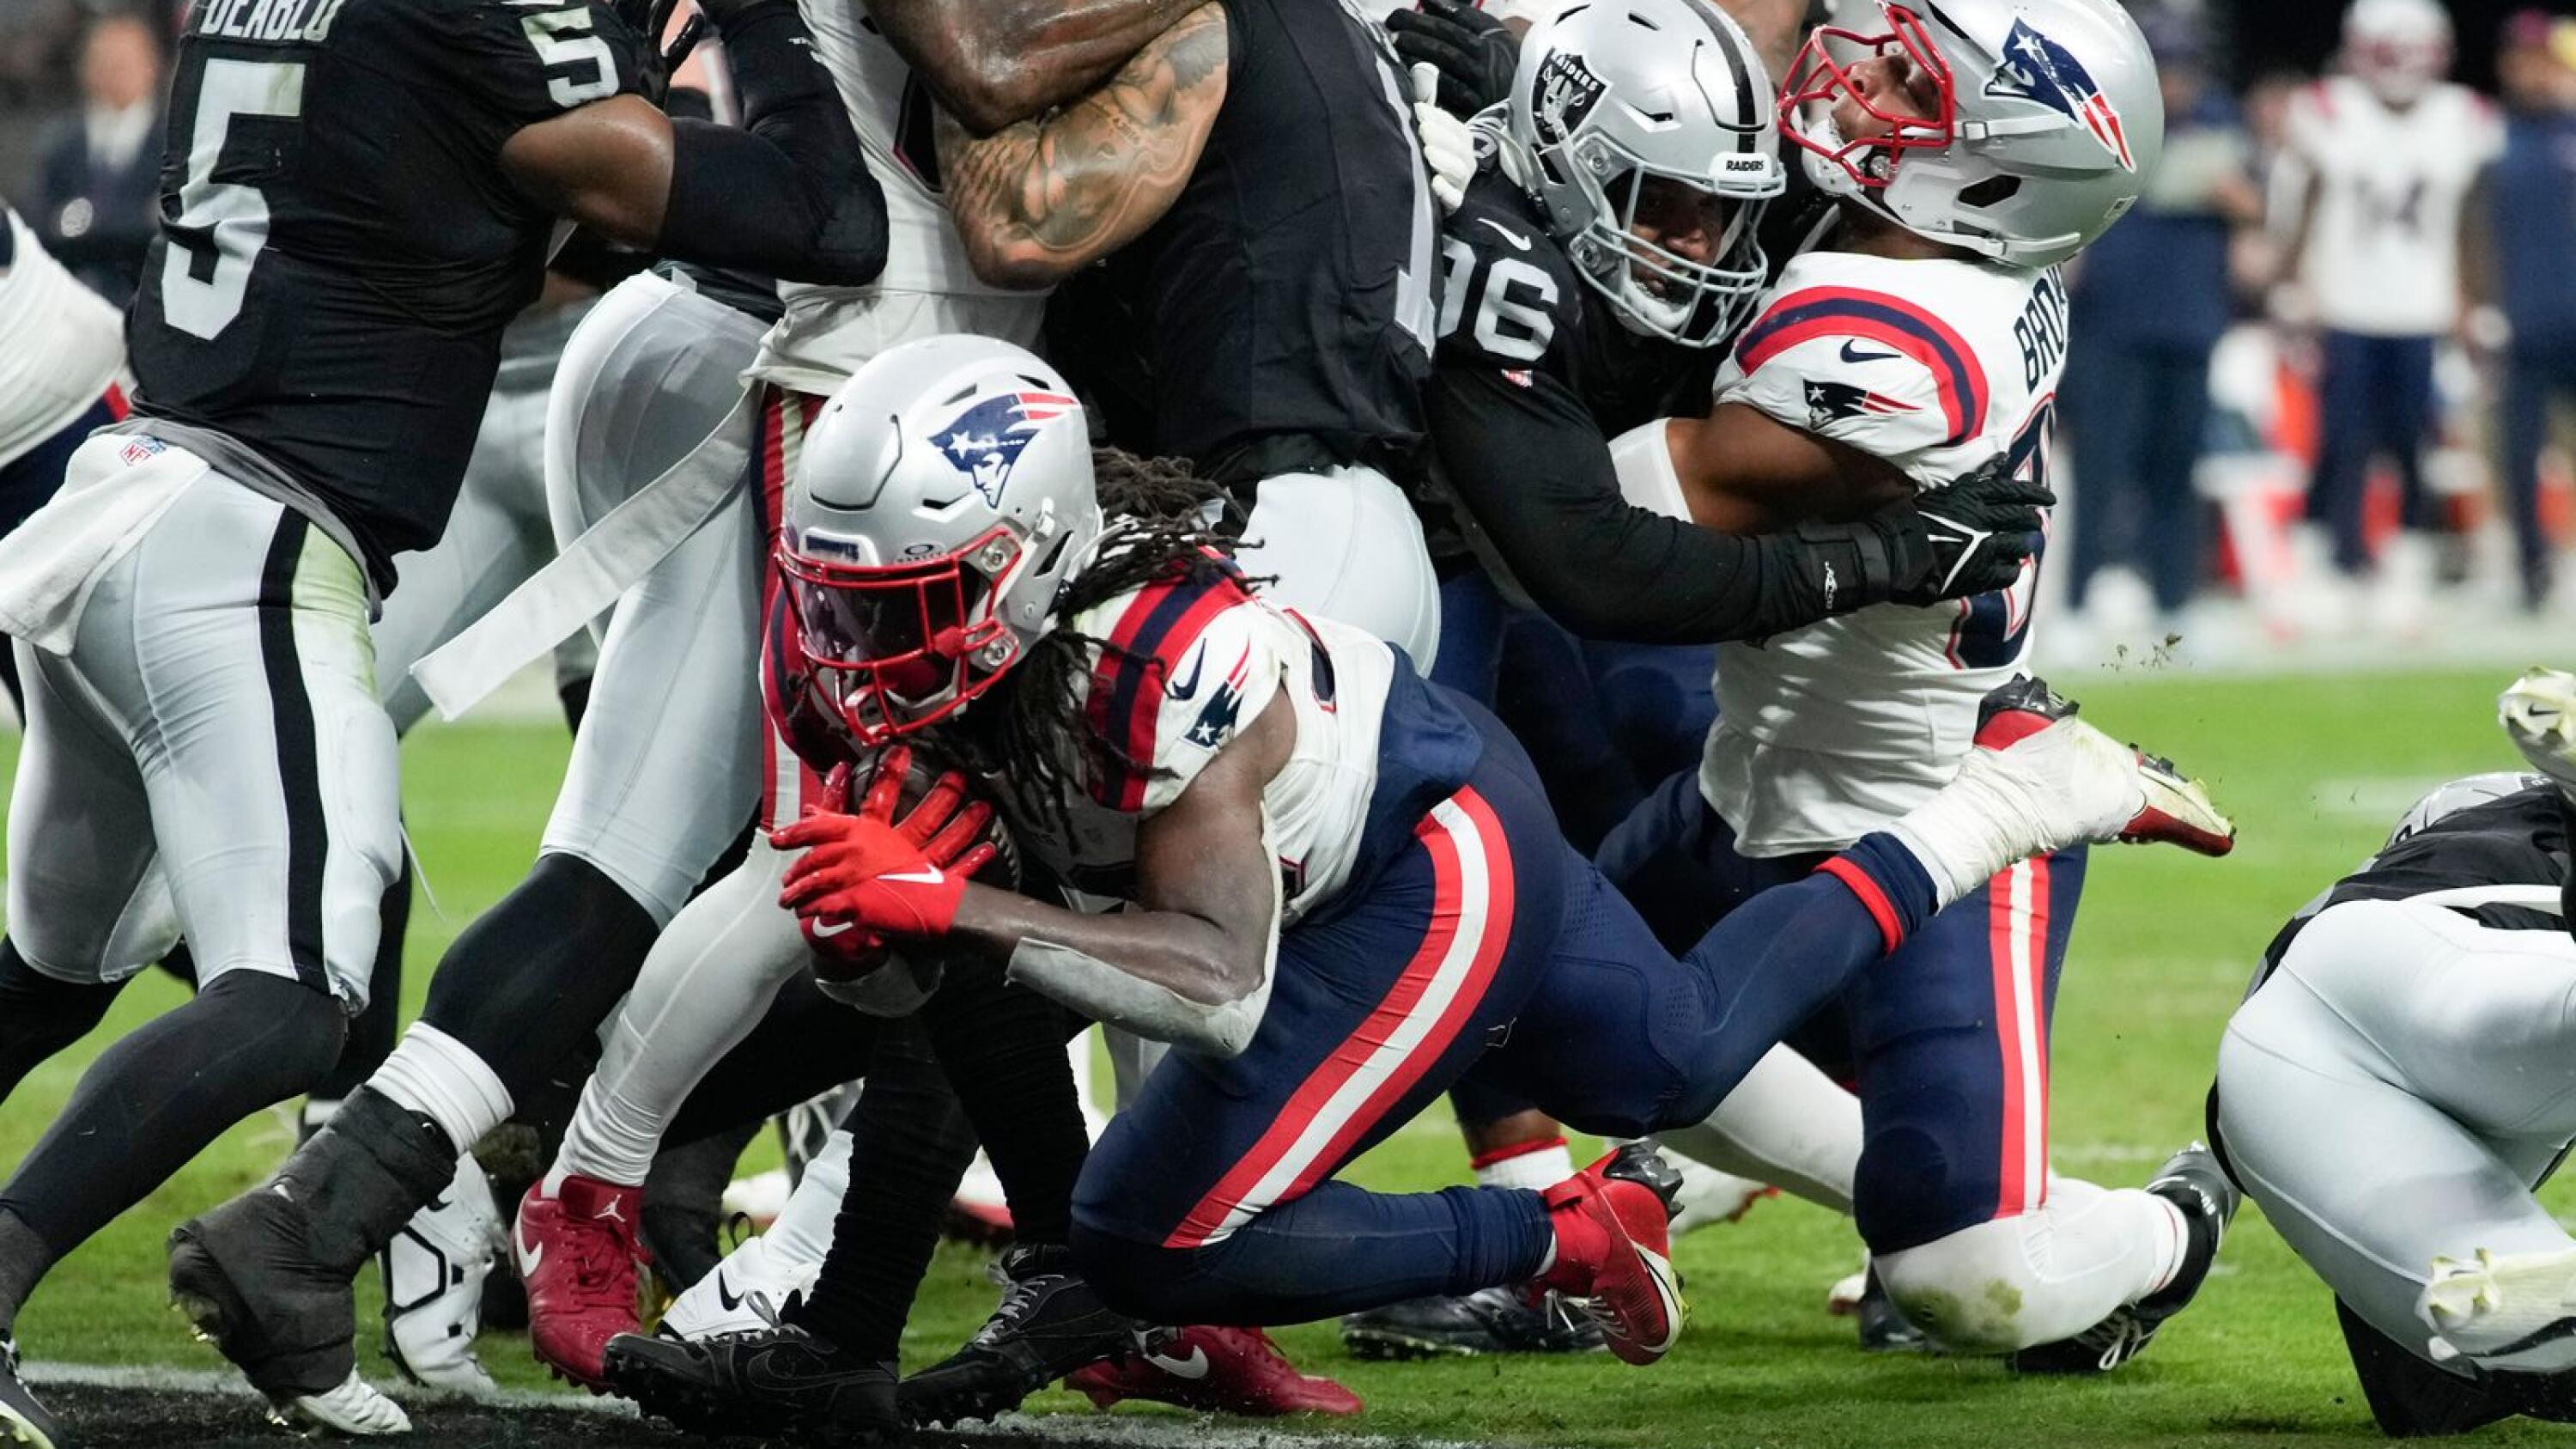 Raiders hold off Patriots 21-17 after losing QB Garoppolo to back injury